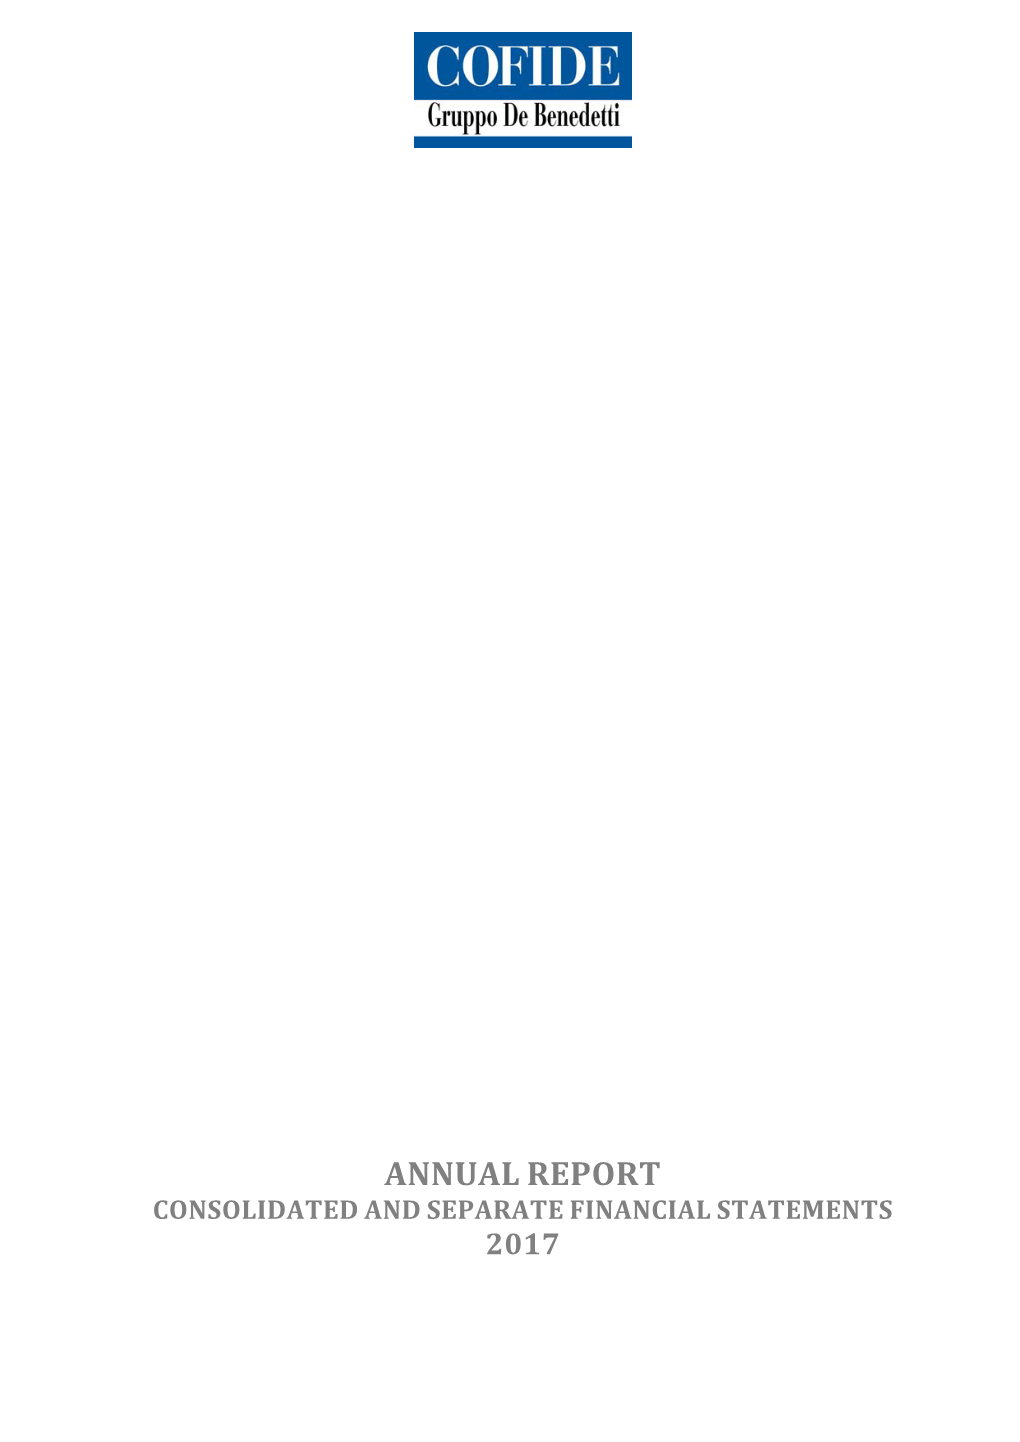 Annual Report Consolidated and Separate Financial Statements 2017